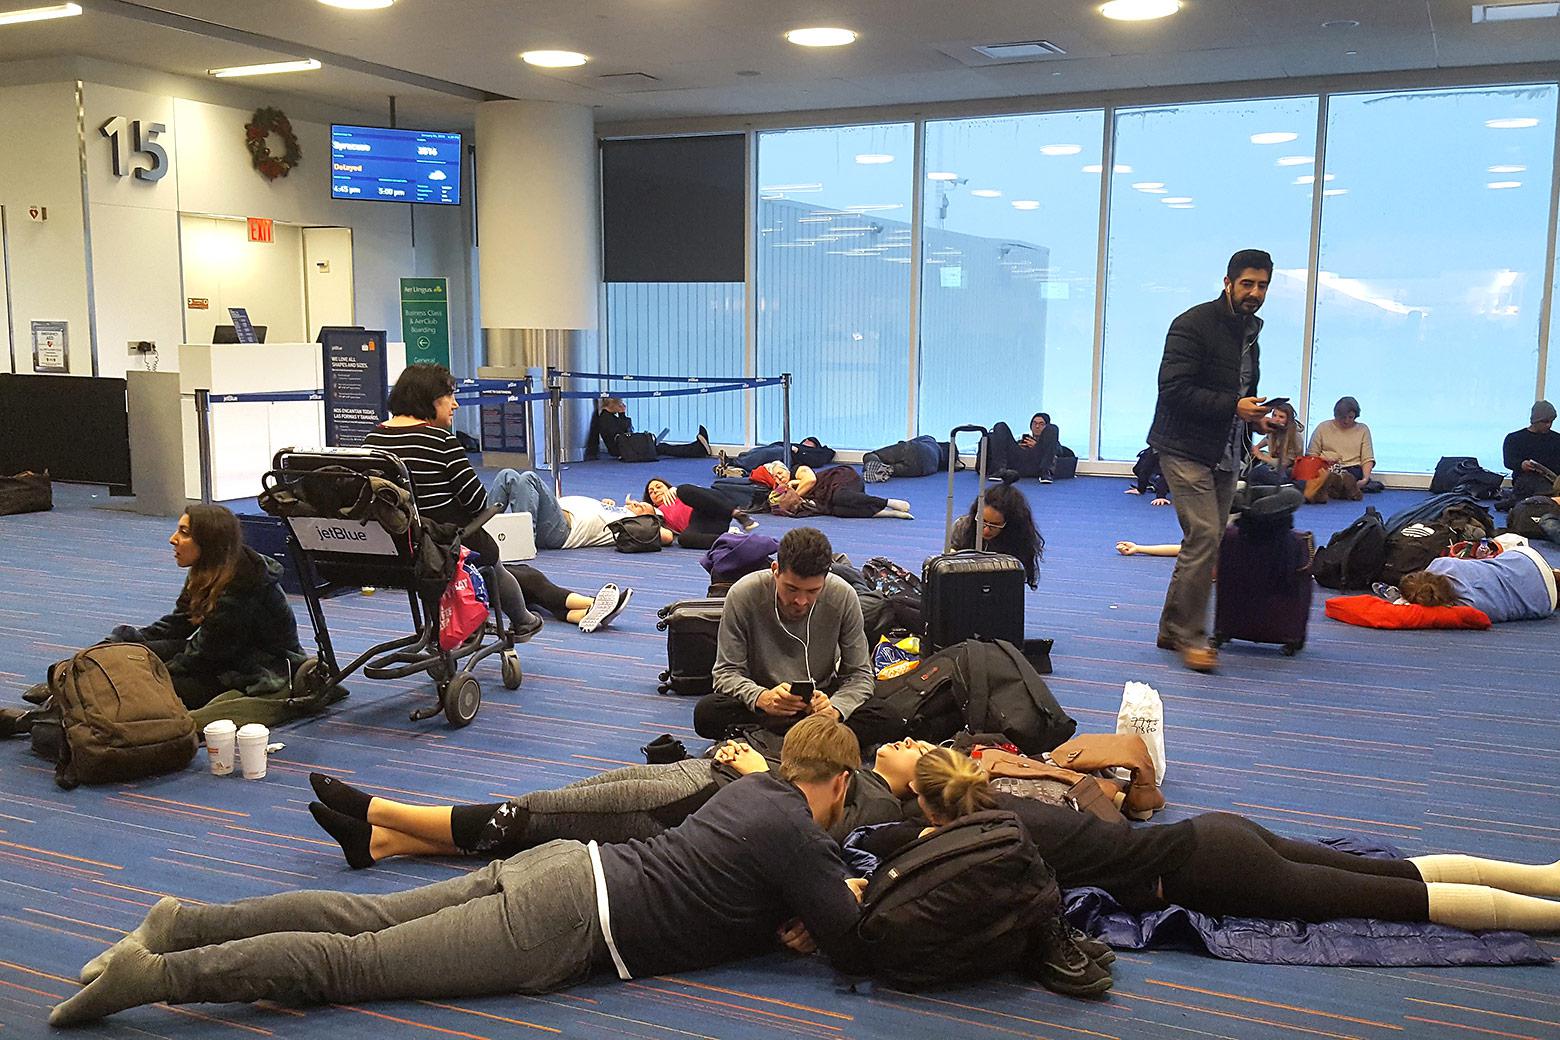 Passengers sit and lay on the floor of the airport.